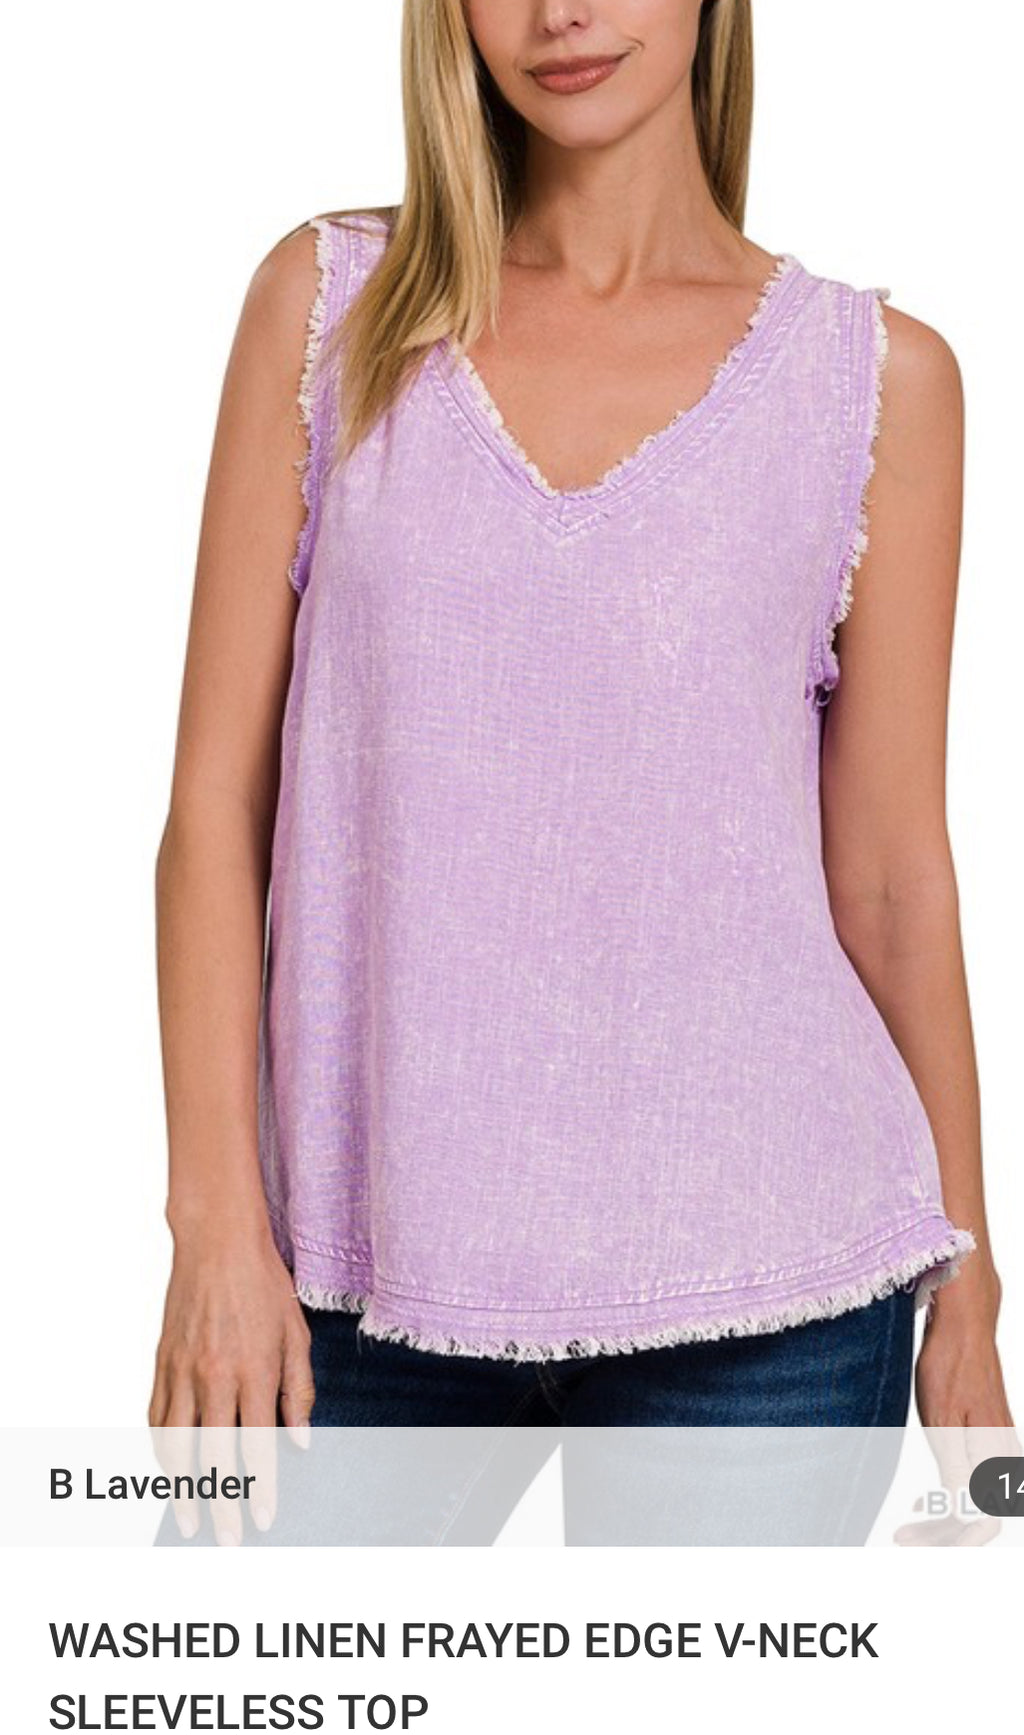 Washed linen frayed top - Kelly green or lavender